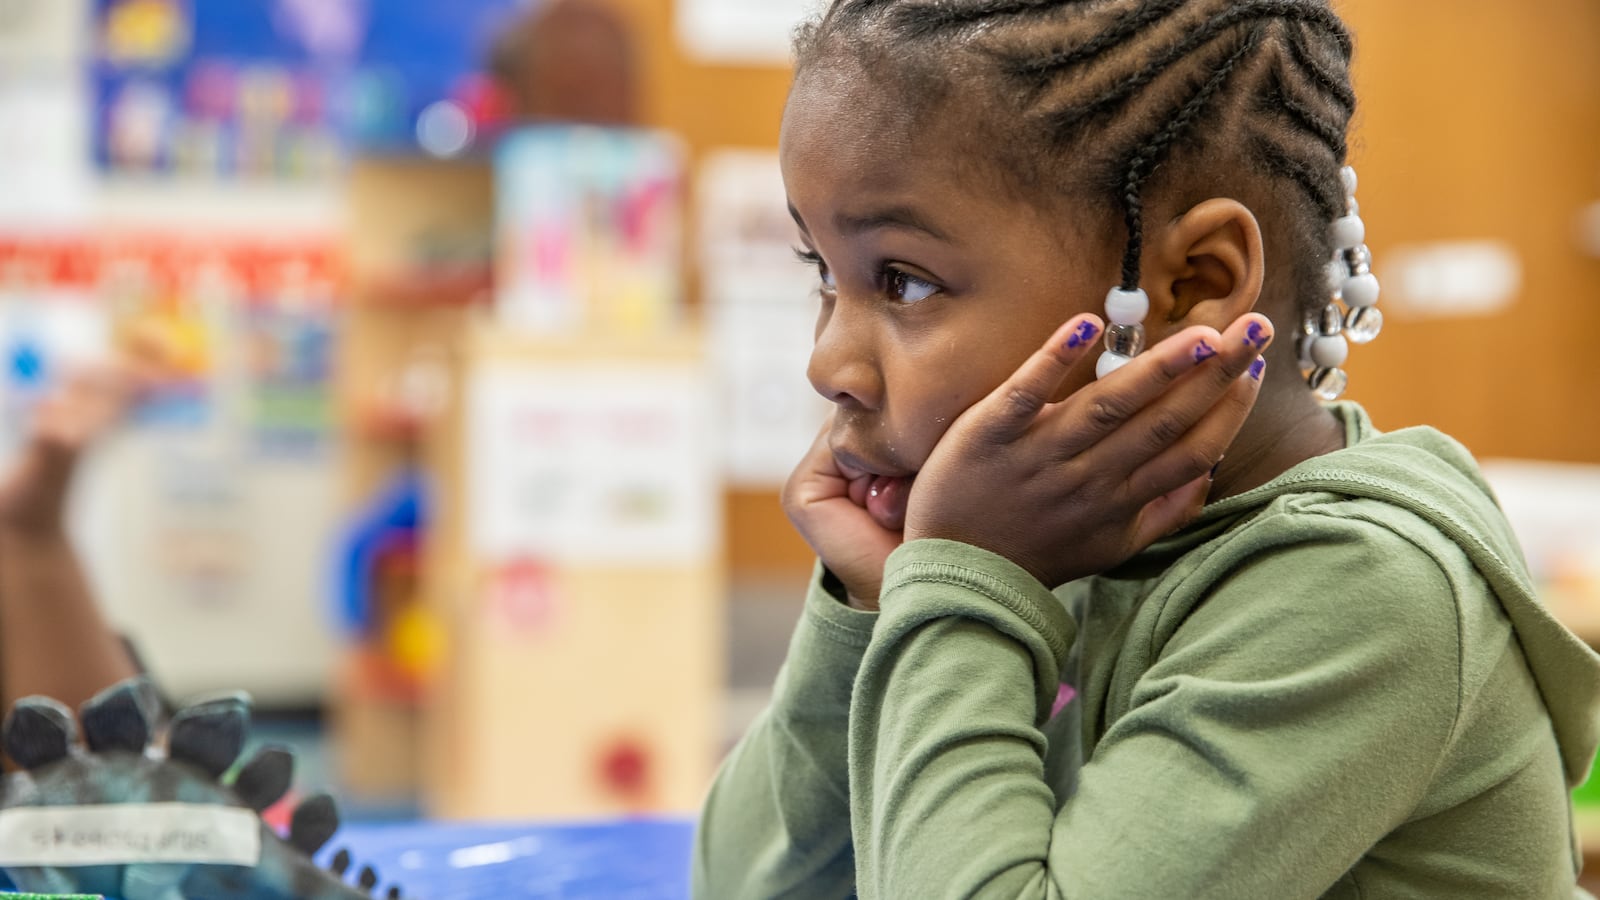 Prius Winters, 4, a pre-kindergarten student at Avondale Meadows YMCA Early Learning Center in Indianapolis, waits for teacher, Cecelia Washington, to label her drawing of her favorite dinosaur during a lesson on Tuesday, April 30, 2019.